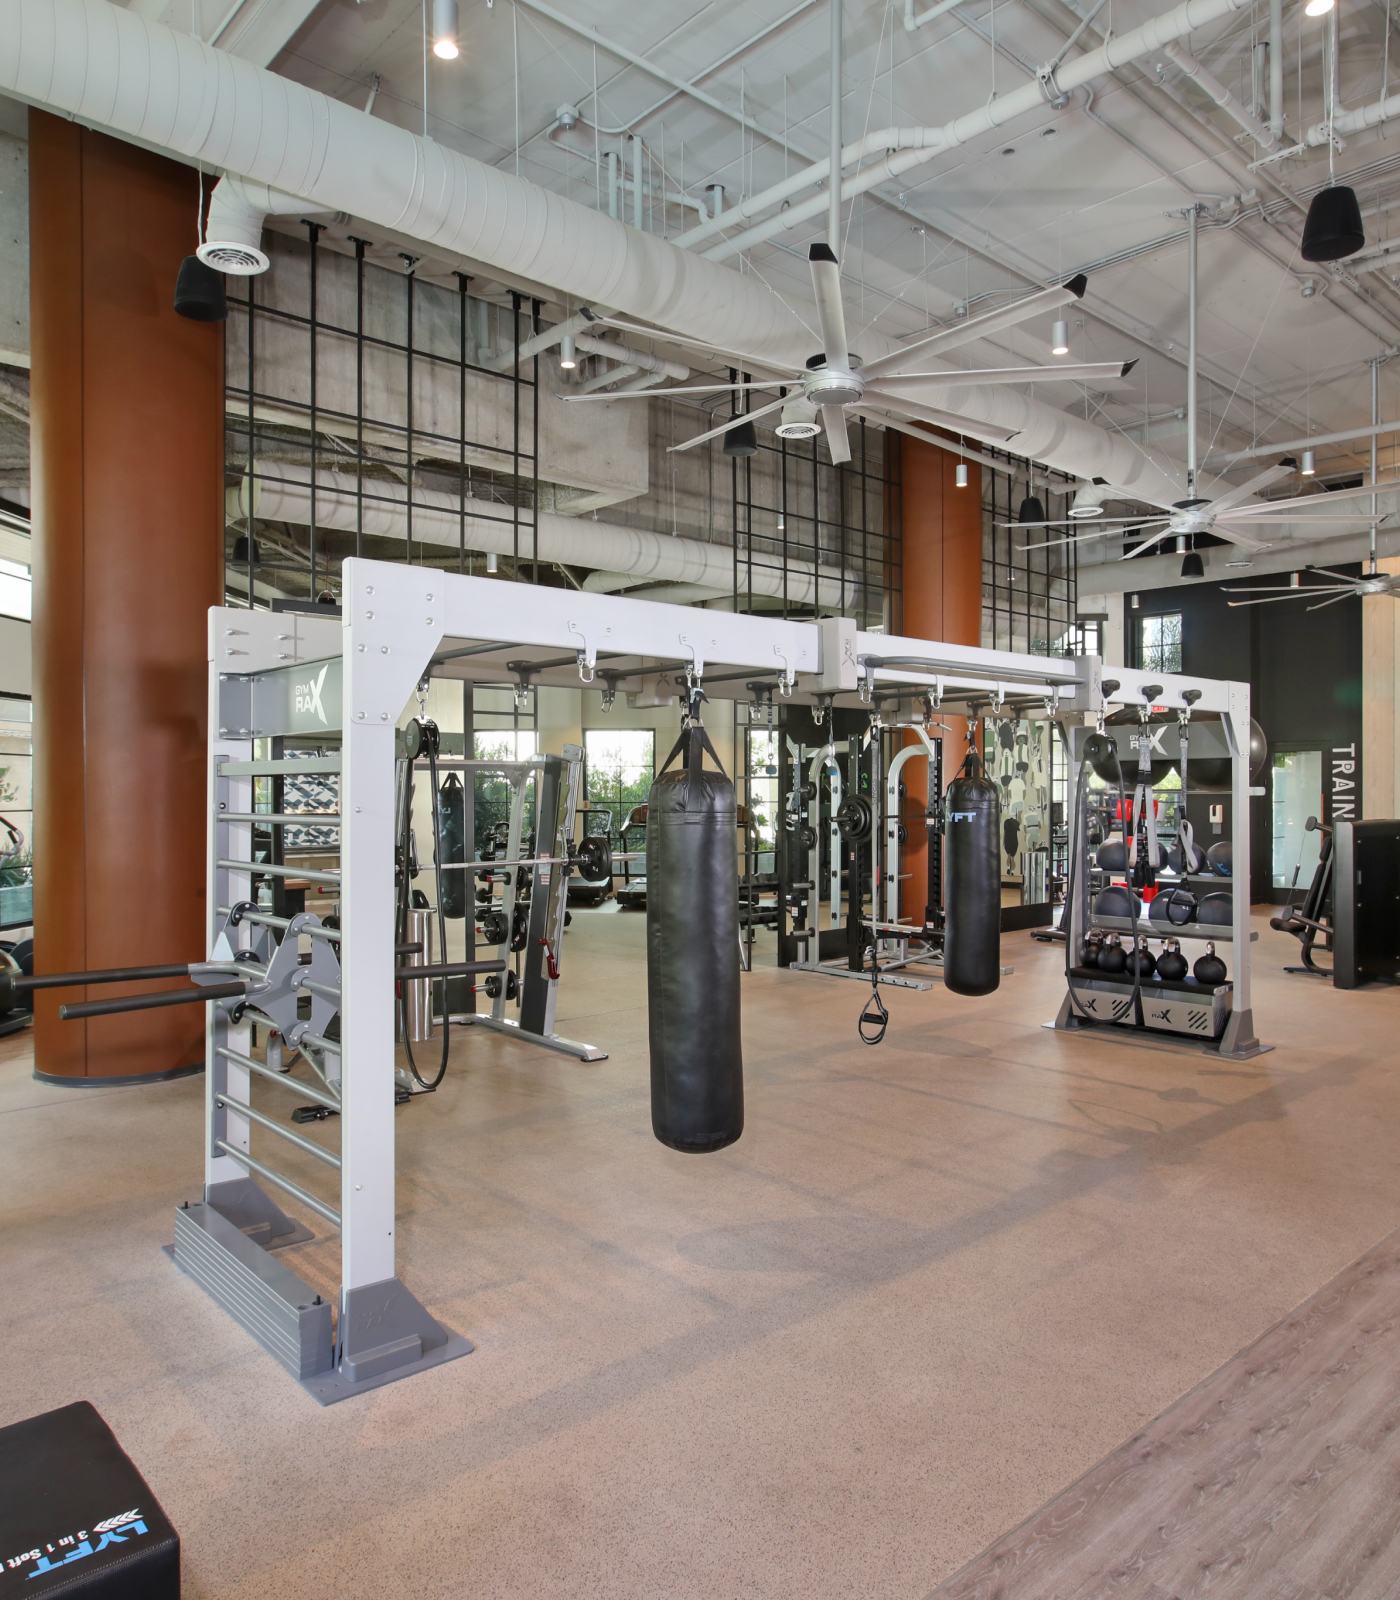 Interior view of a gym with punching bags and workout machines